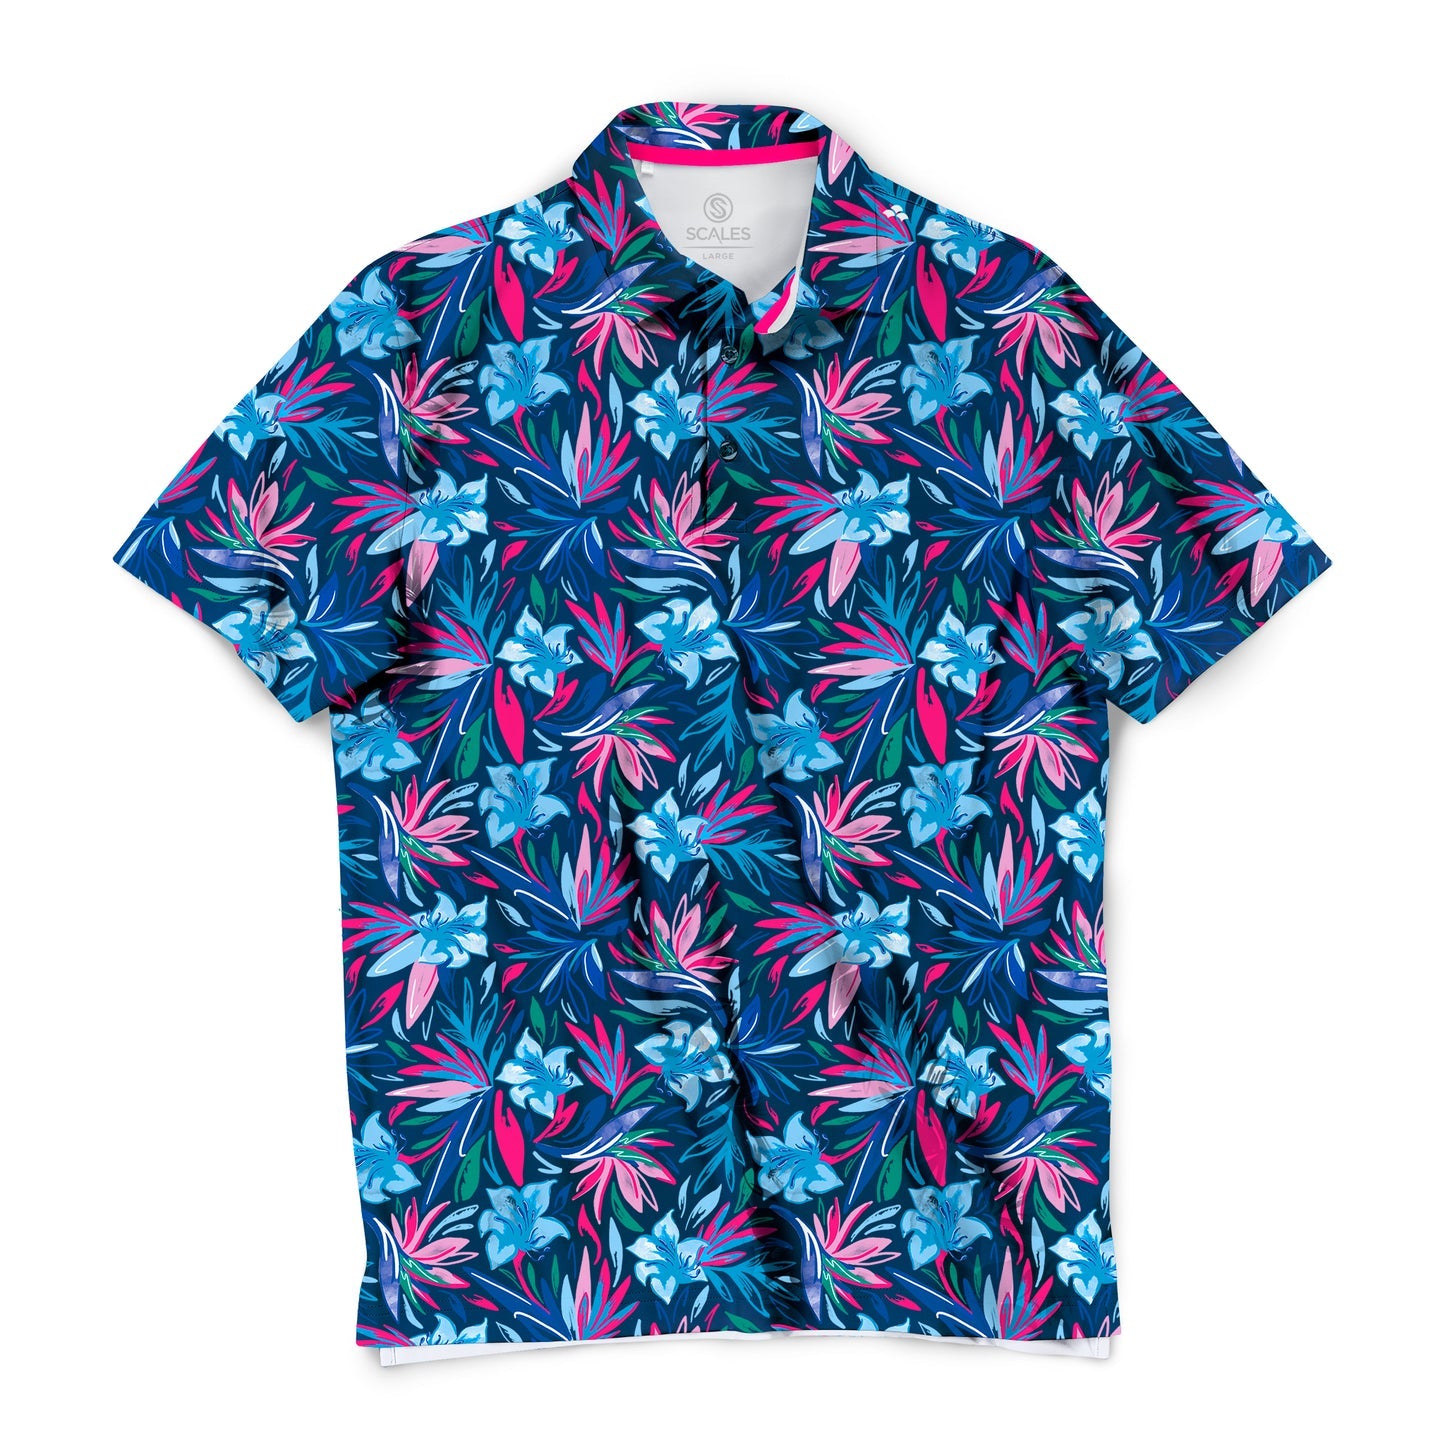 SCALES Wild Flowers Polo